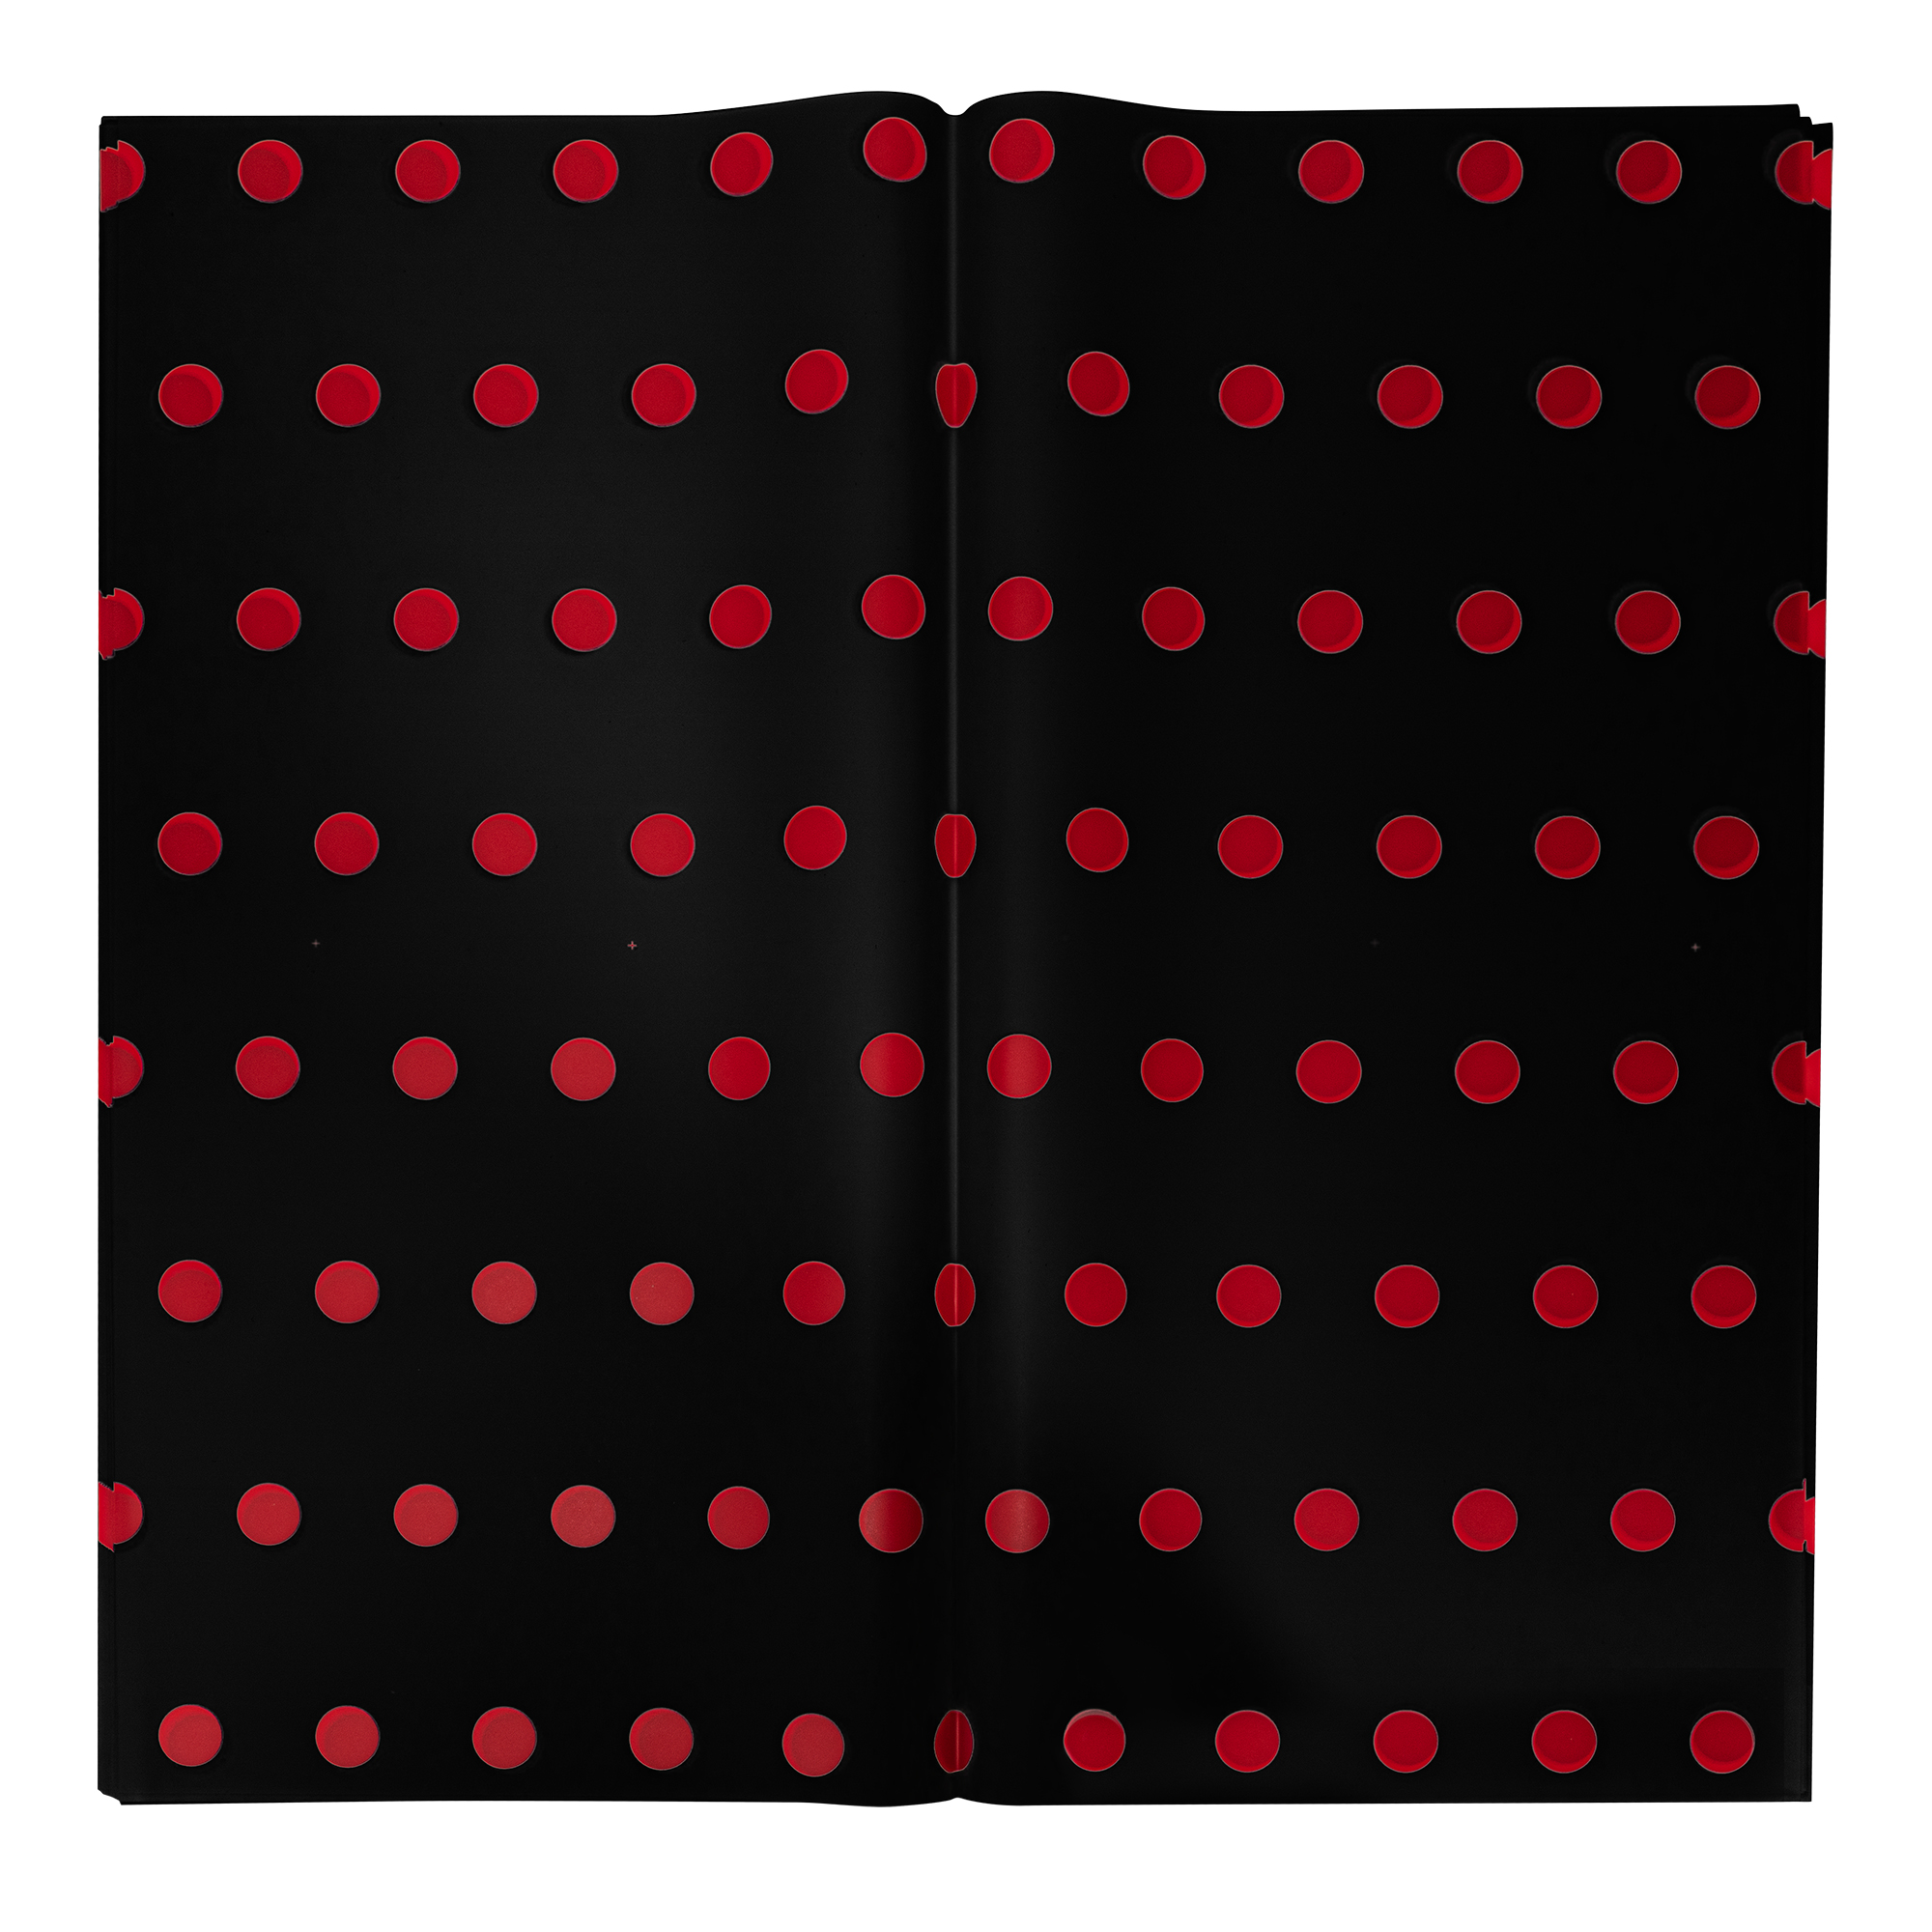 Floral Wrapping Paper With Polka Dots 20pc/pack  - Black & Red